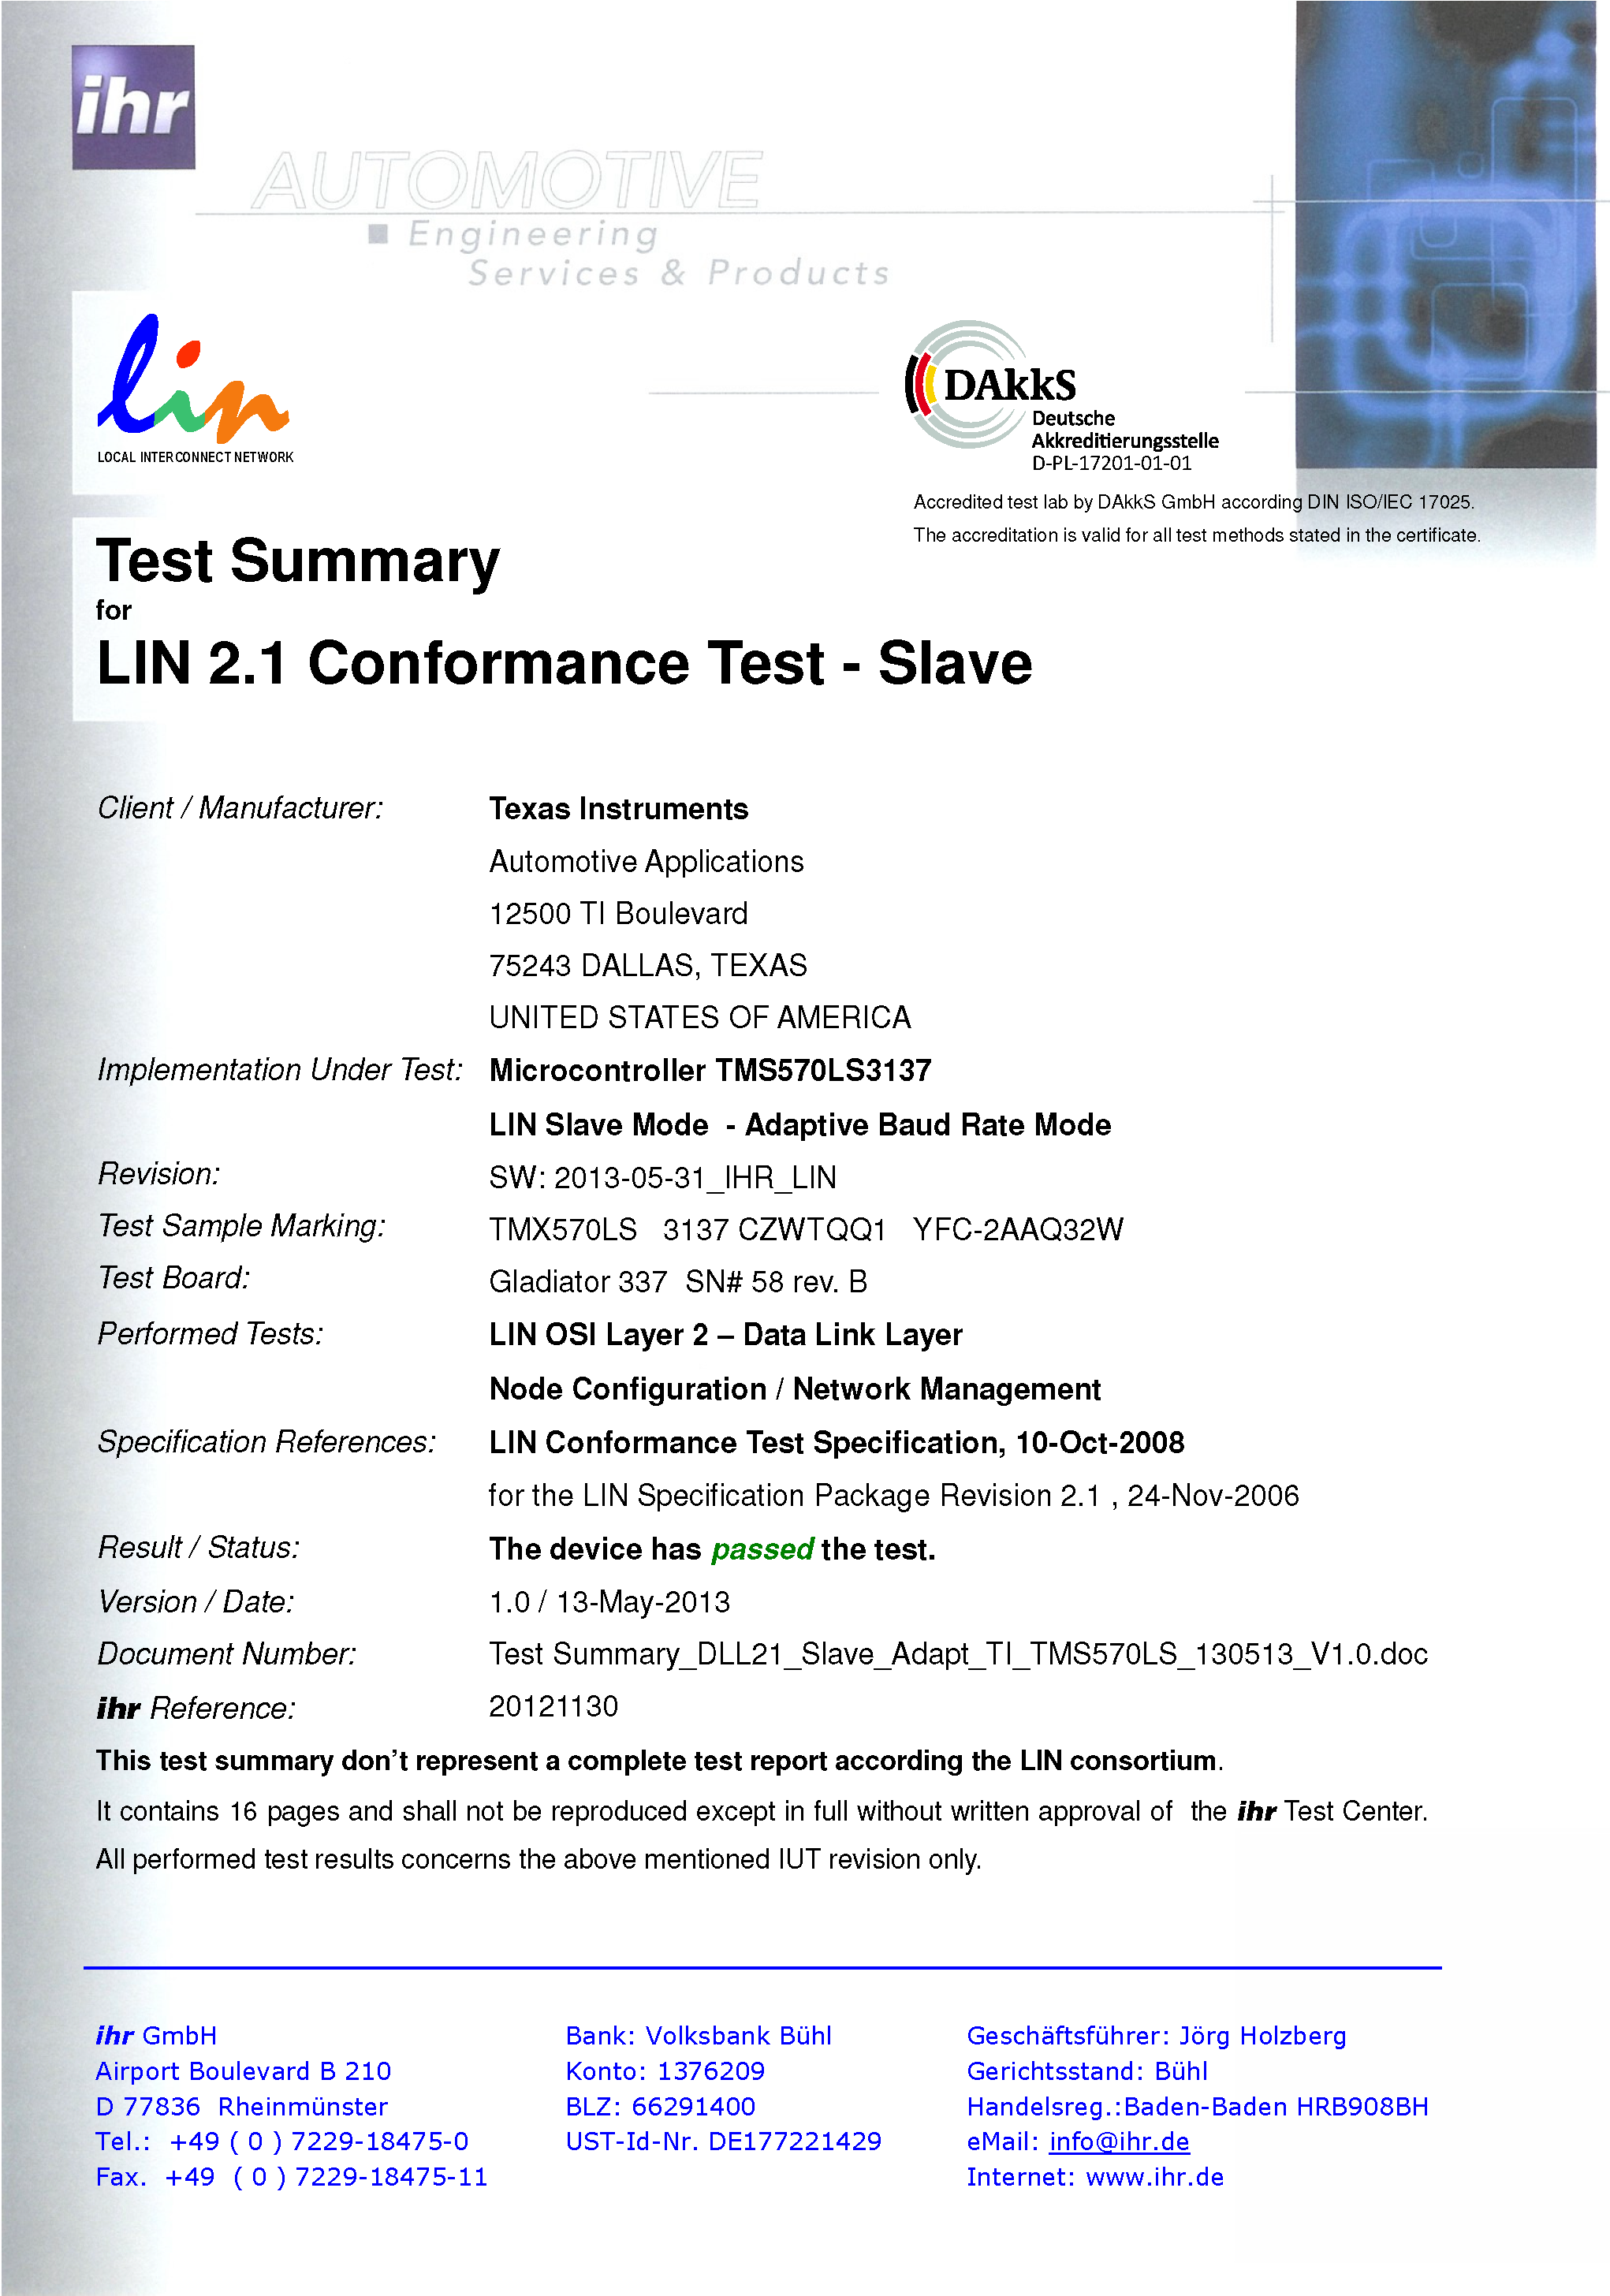 RM46L430 RM46L830 new_LIN_Certification_Slave_Adapt.png